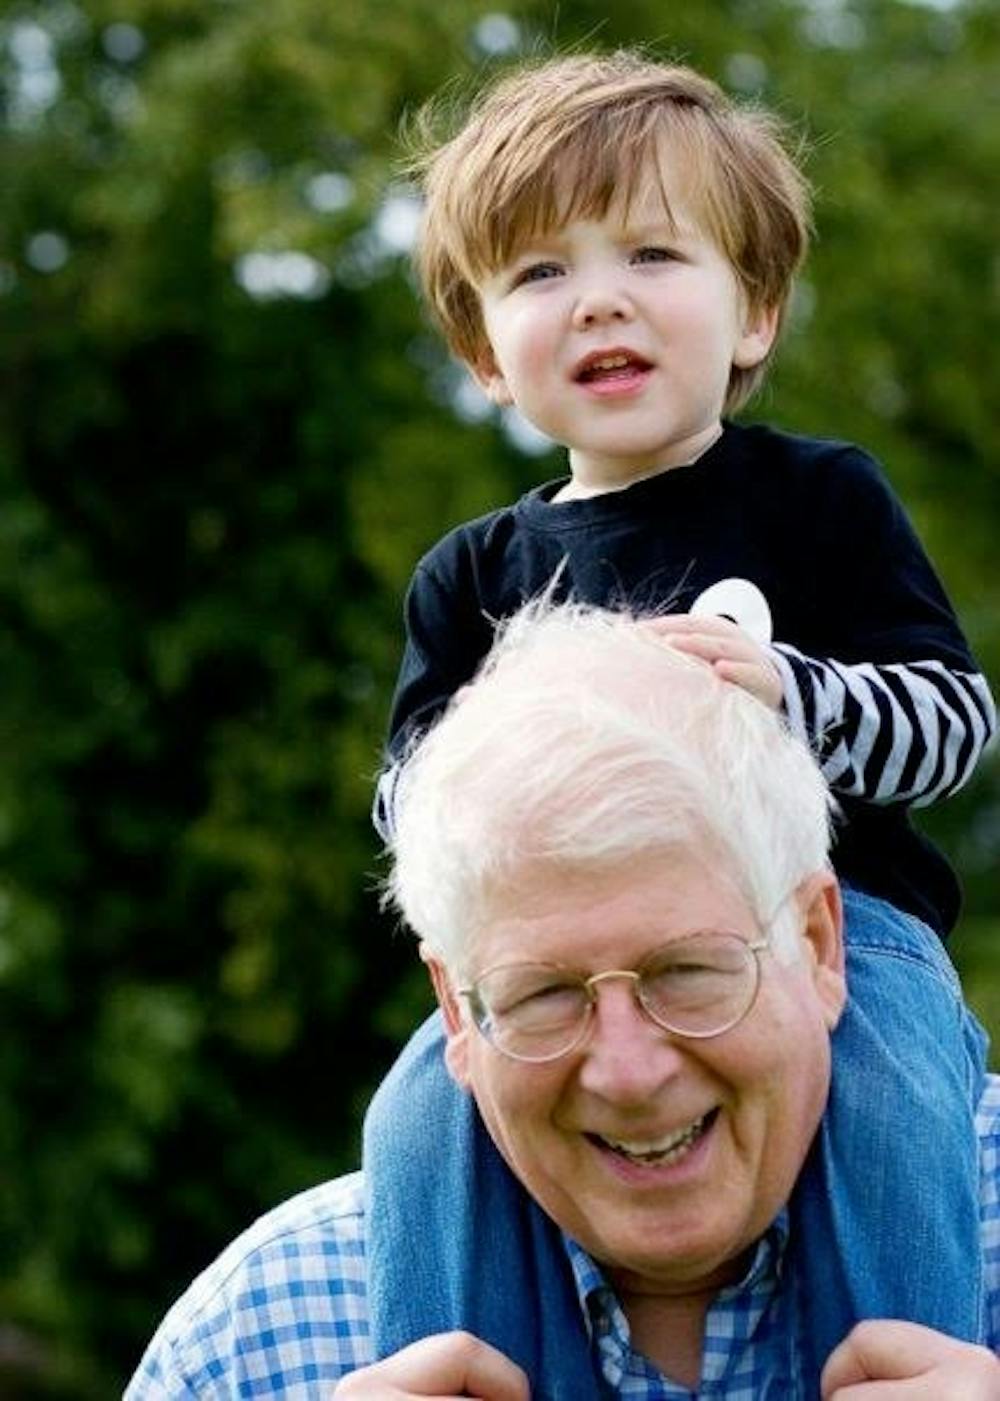 David&nbsp;Price with his&nbsp;grandson Charles in London in August 2008. His son Michael is a professor in London. Photo courtesy of Michael Price.